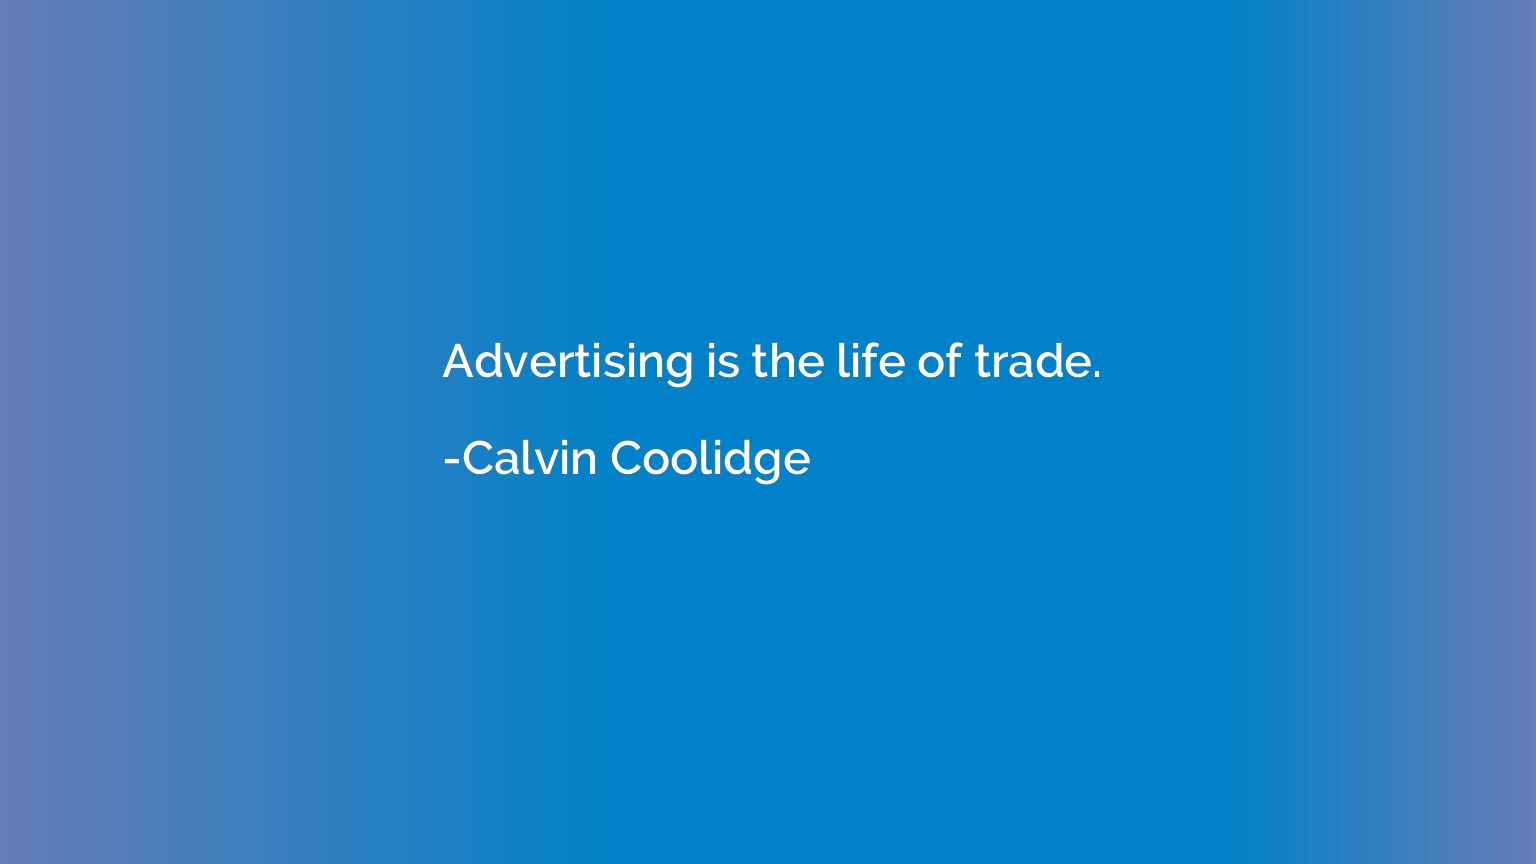 Advertising is the life of trade.